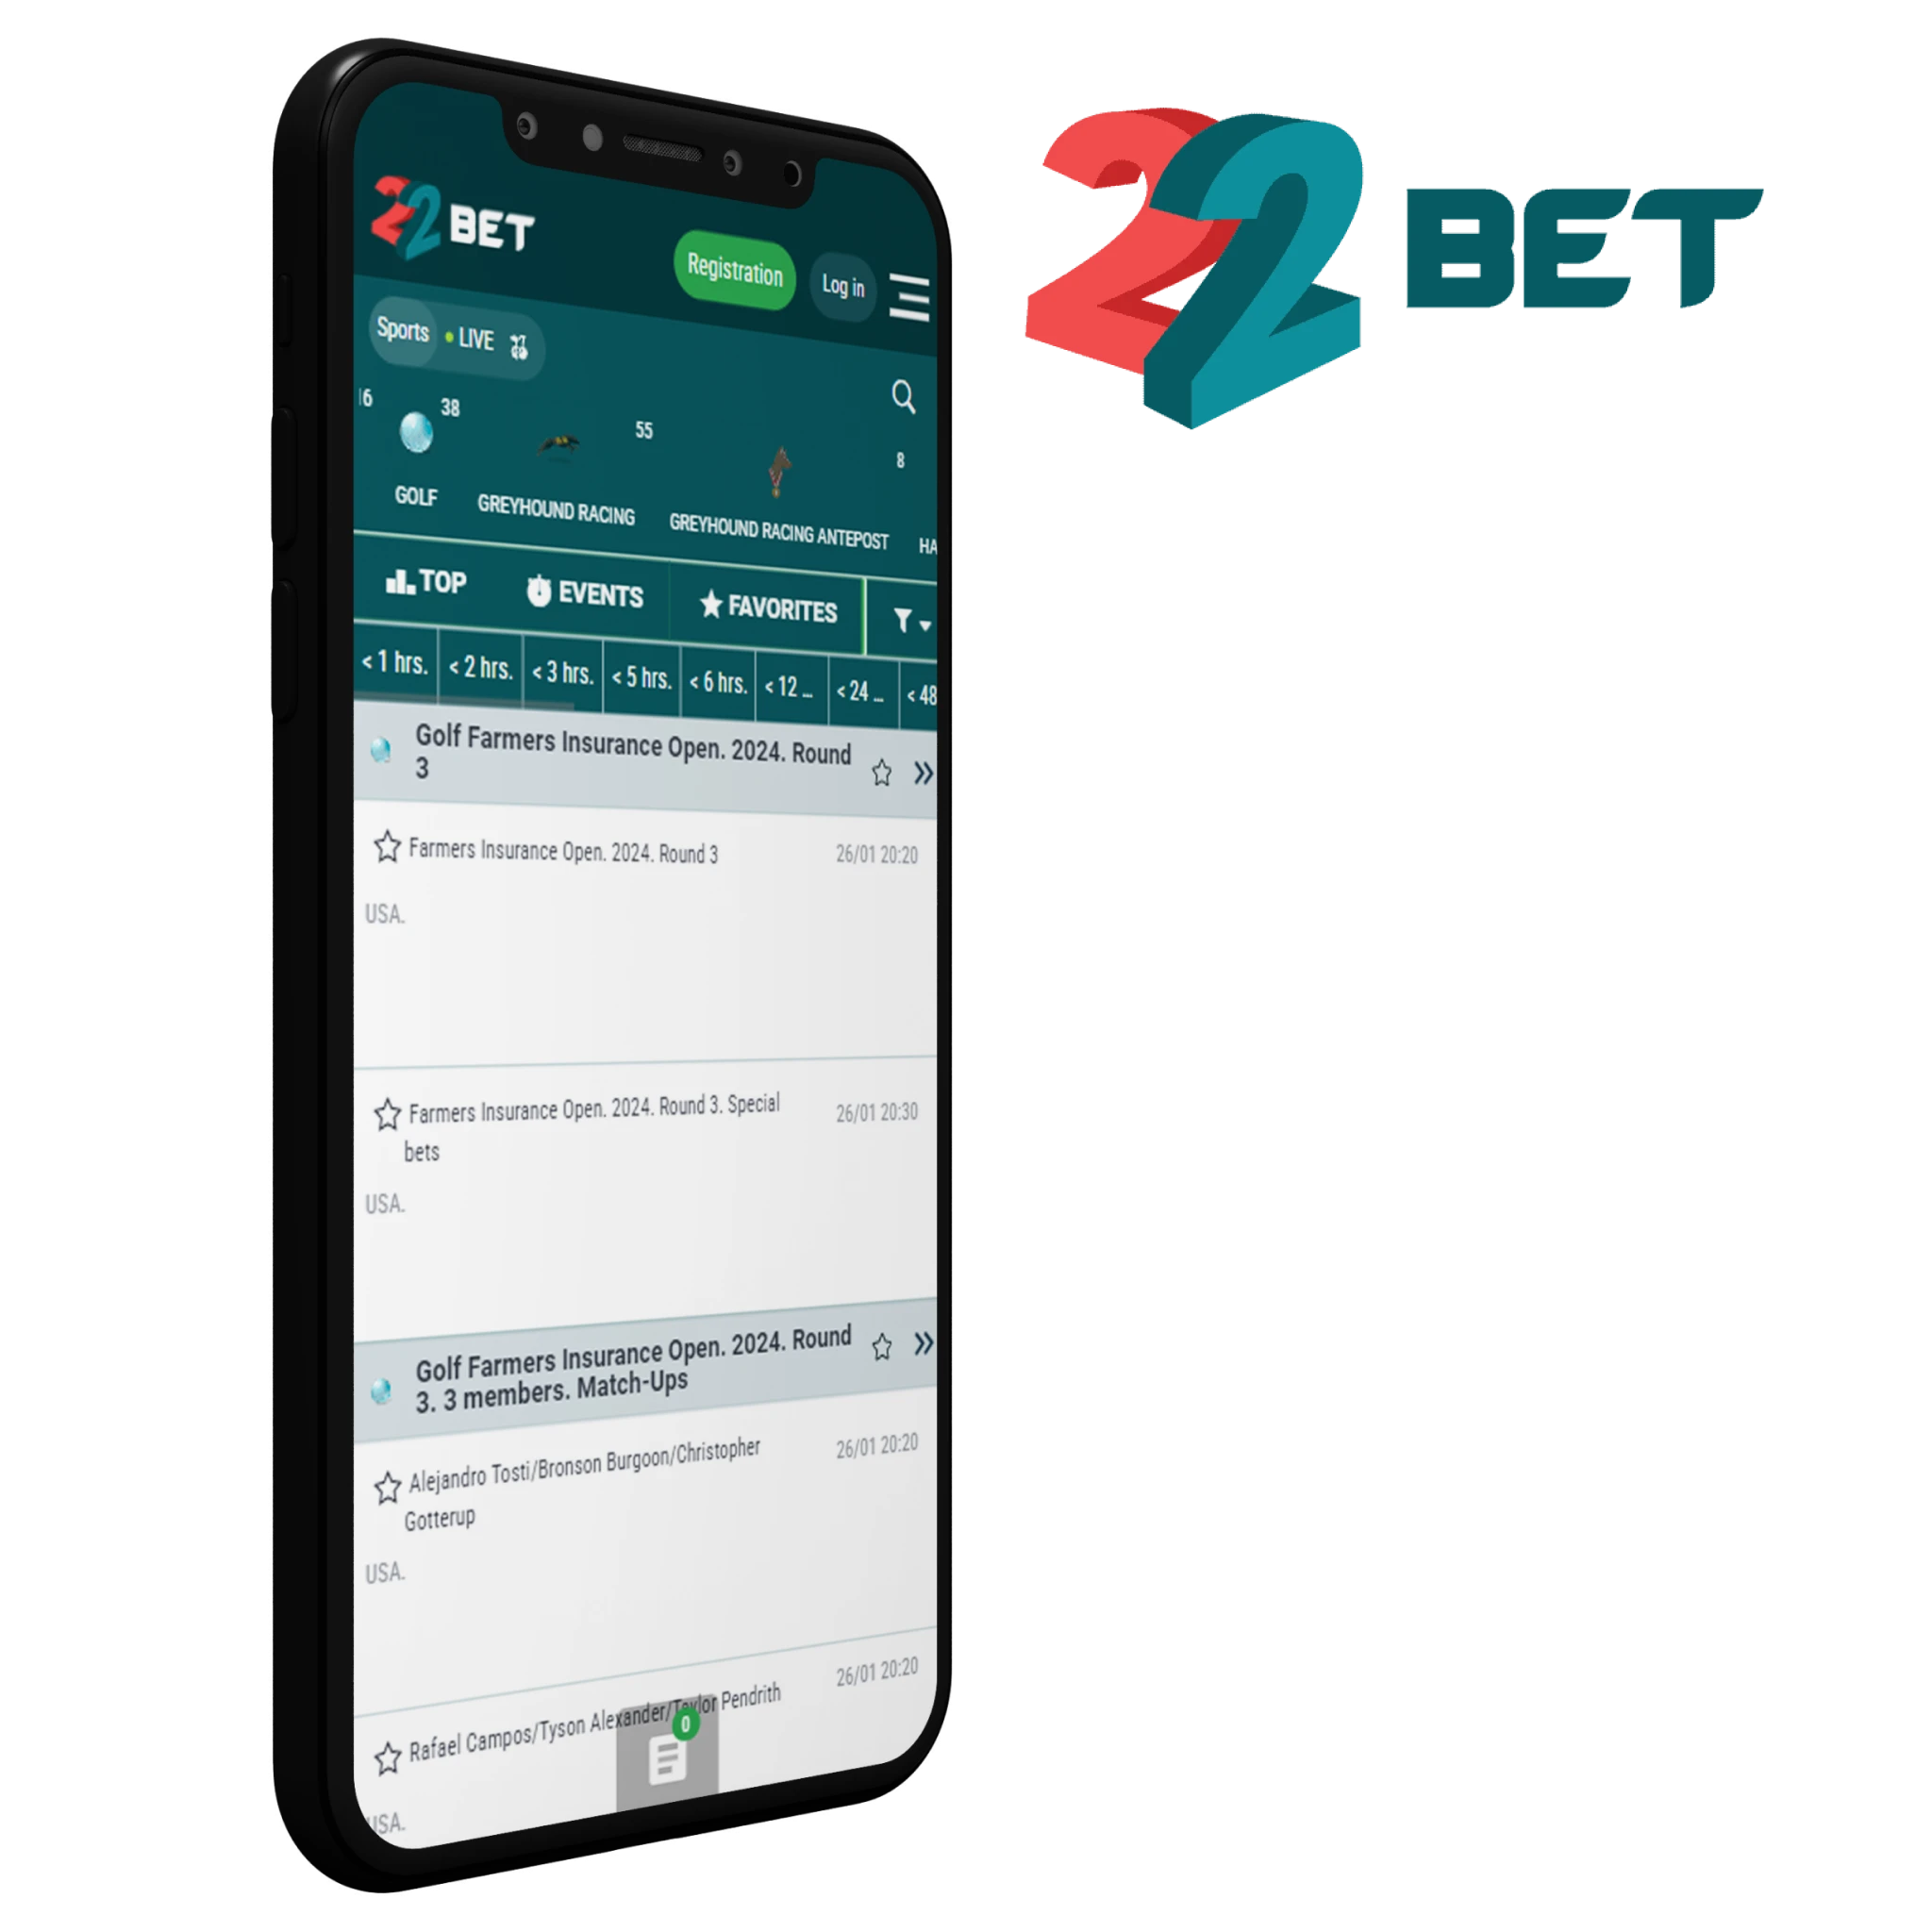 Indian players choose the 22bet app to bet on golf.